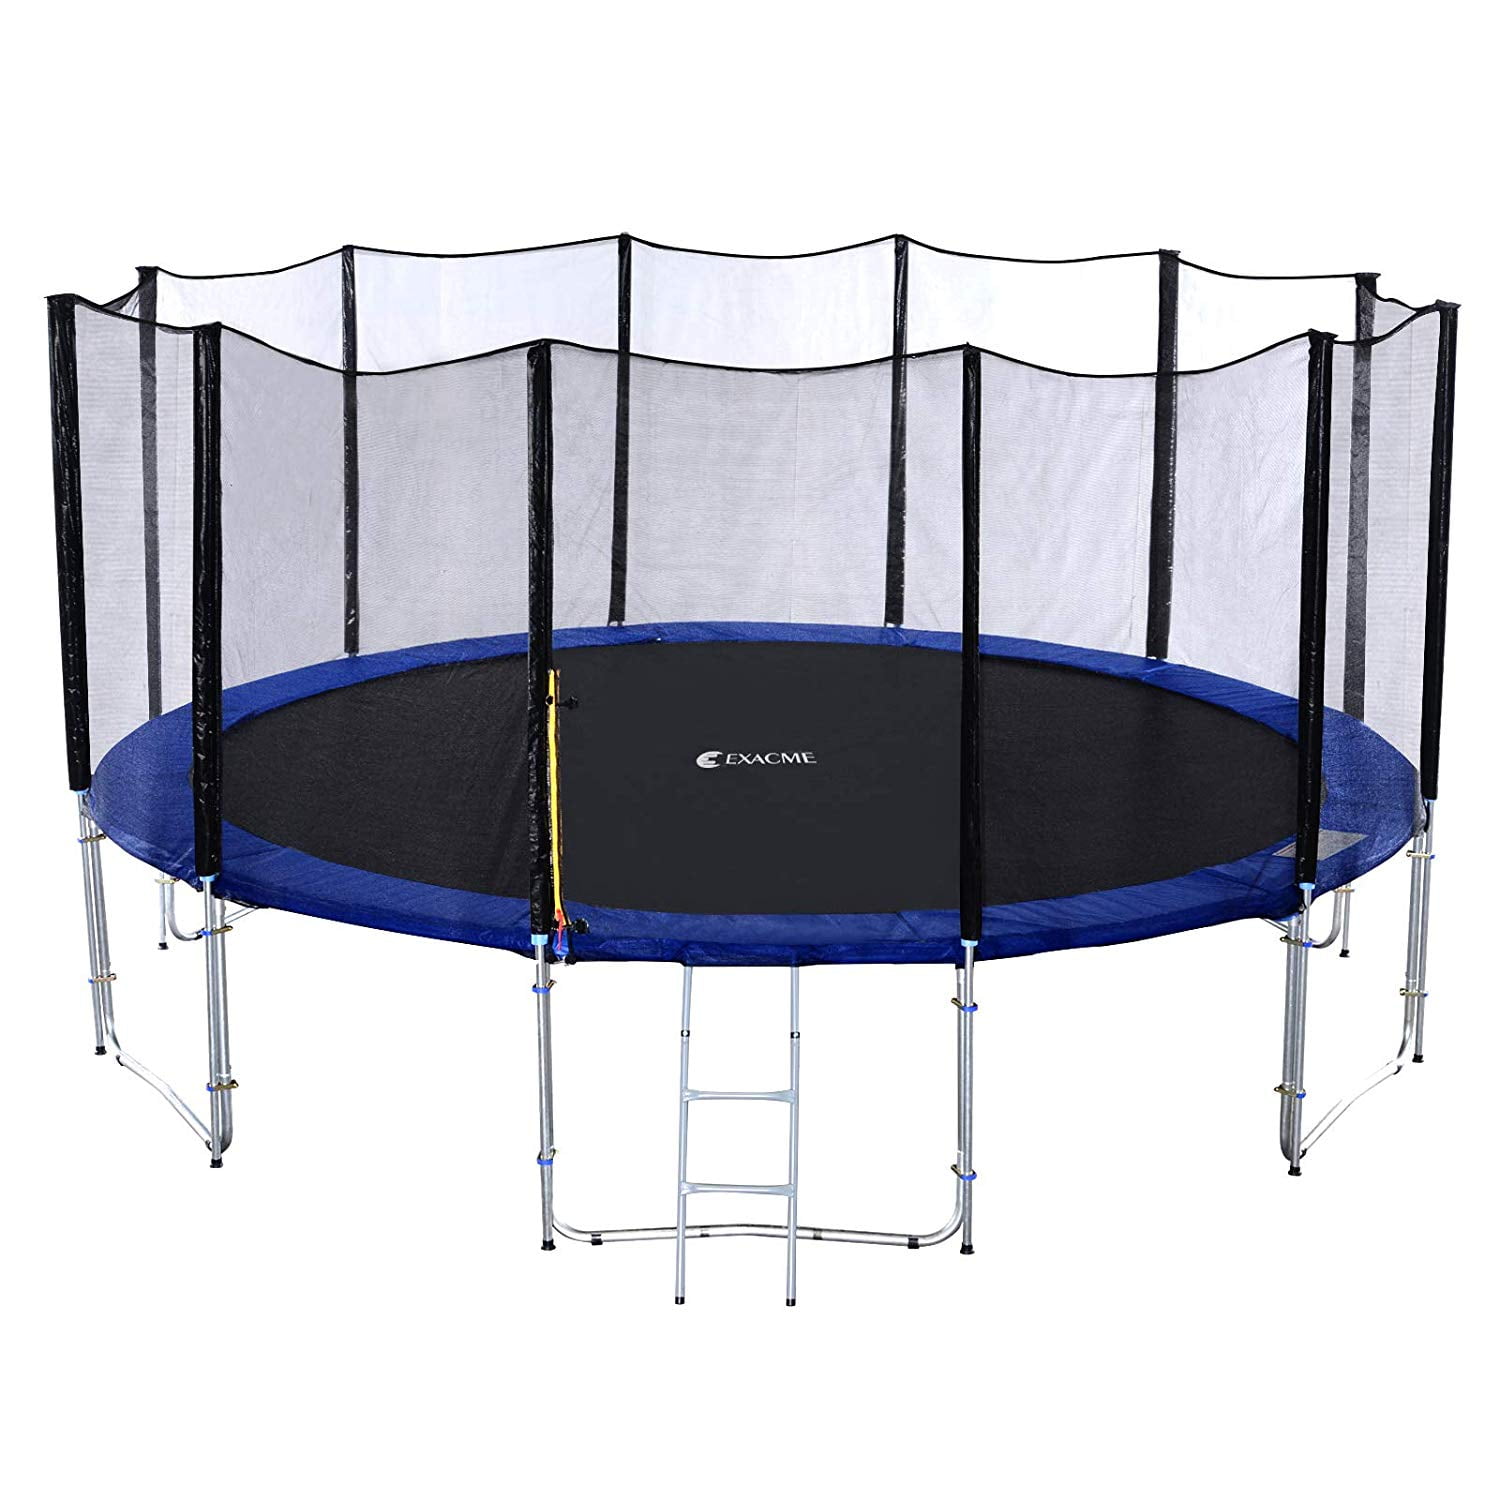 Exacme Big Outdoor Trampoline with Enclosure and Ladder Spring Cover, Heavy Duty Limit, 6180-T16